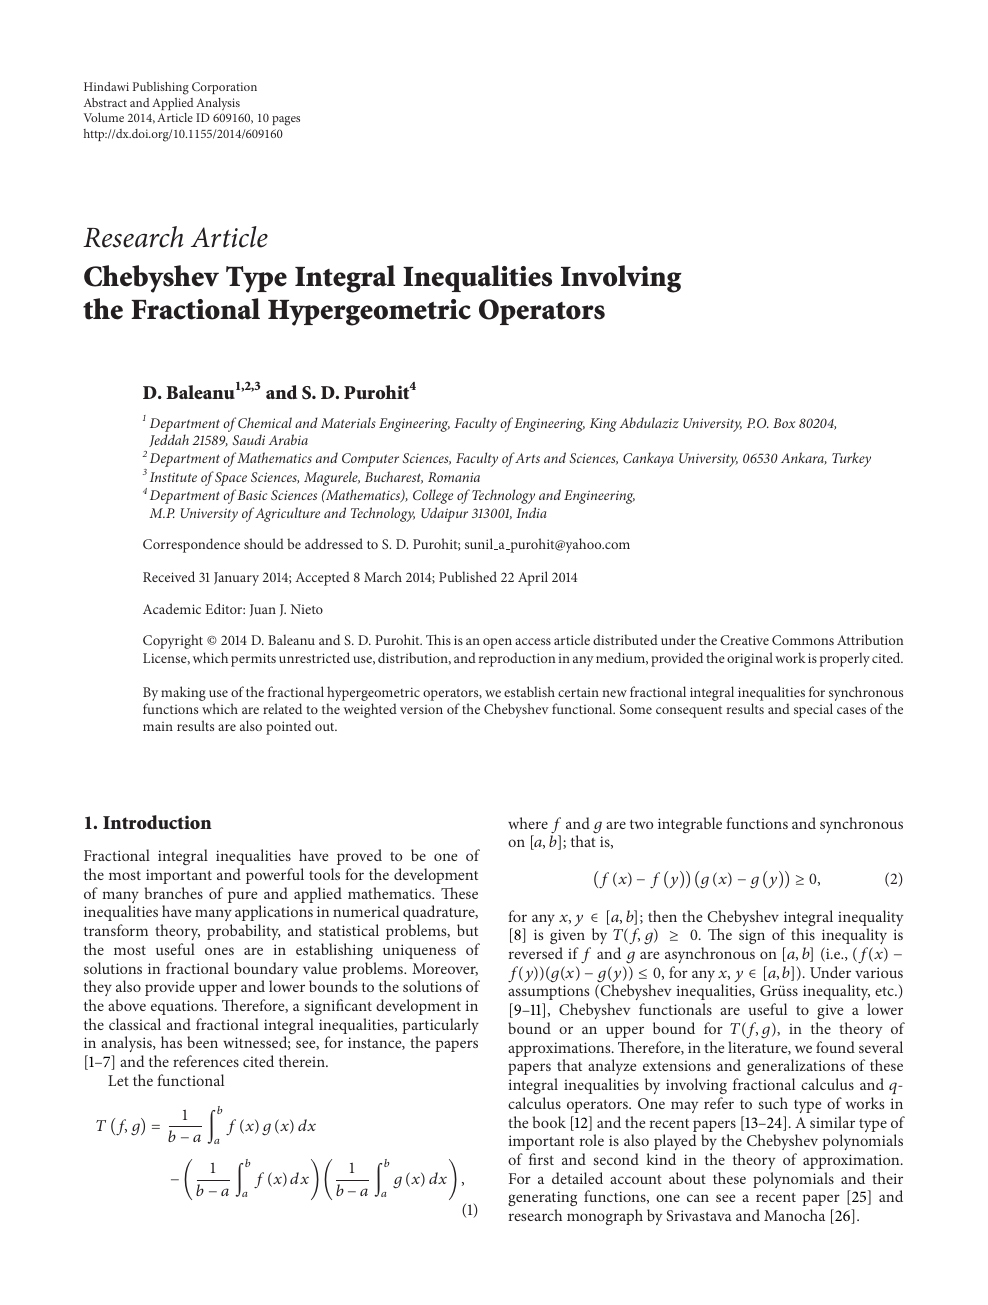 Chebyshev Type Integral Inequalities Involving The Fractional Hypergeometric Operators Topic Of Research Paper In Mathematics Download Scholarly Article Pdf And Read For Free On Cyberleninka Open Science Hub